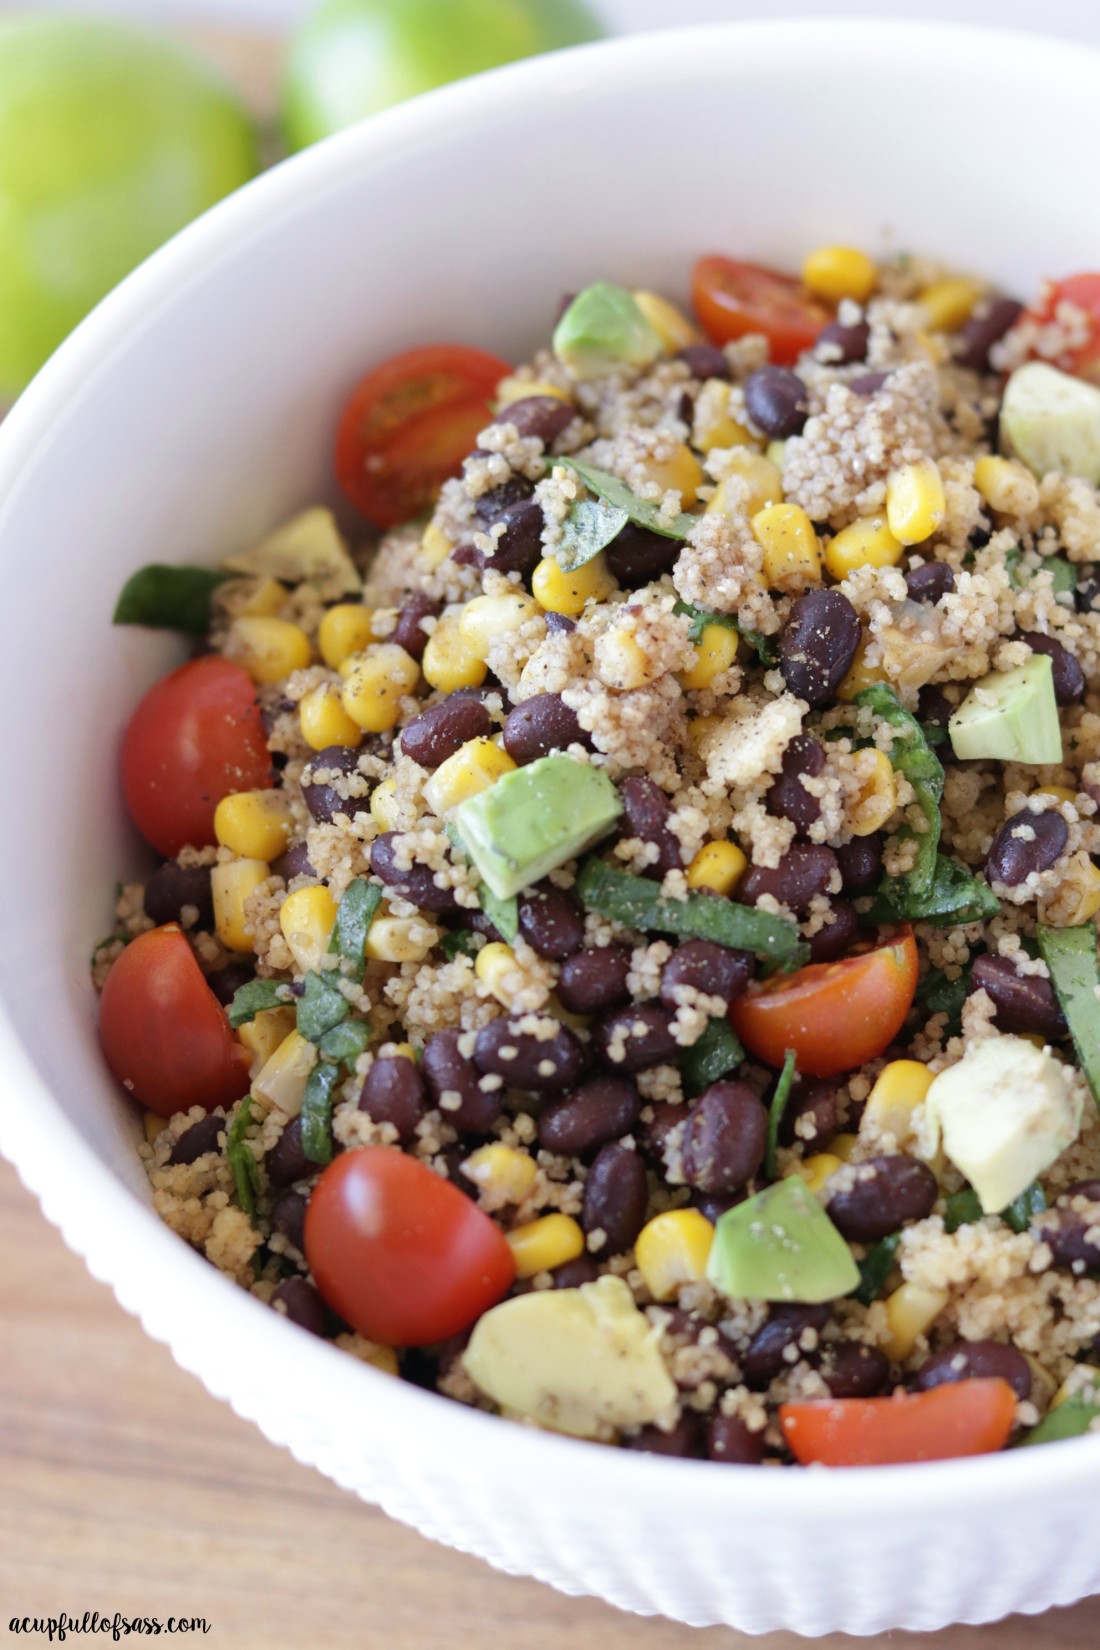 Black Bean and Couscous Salad - A Cup Full of Sass